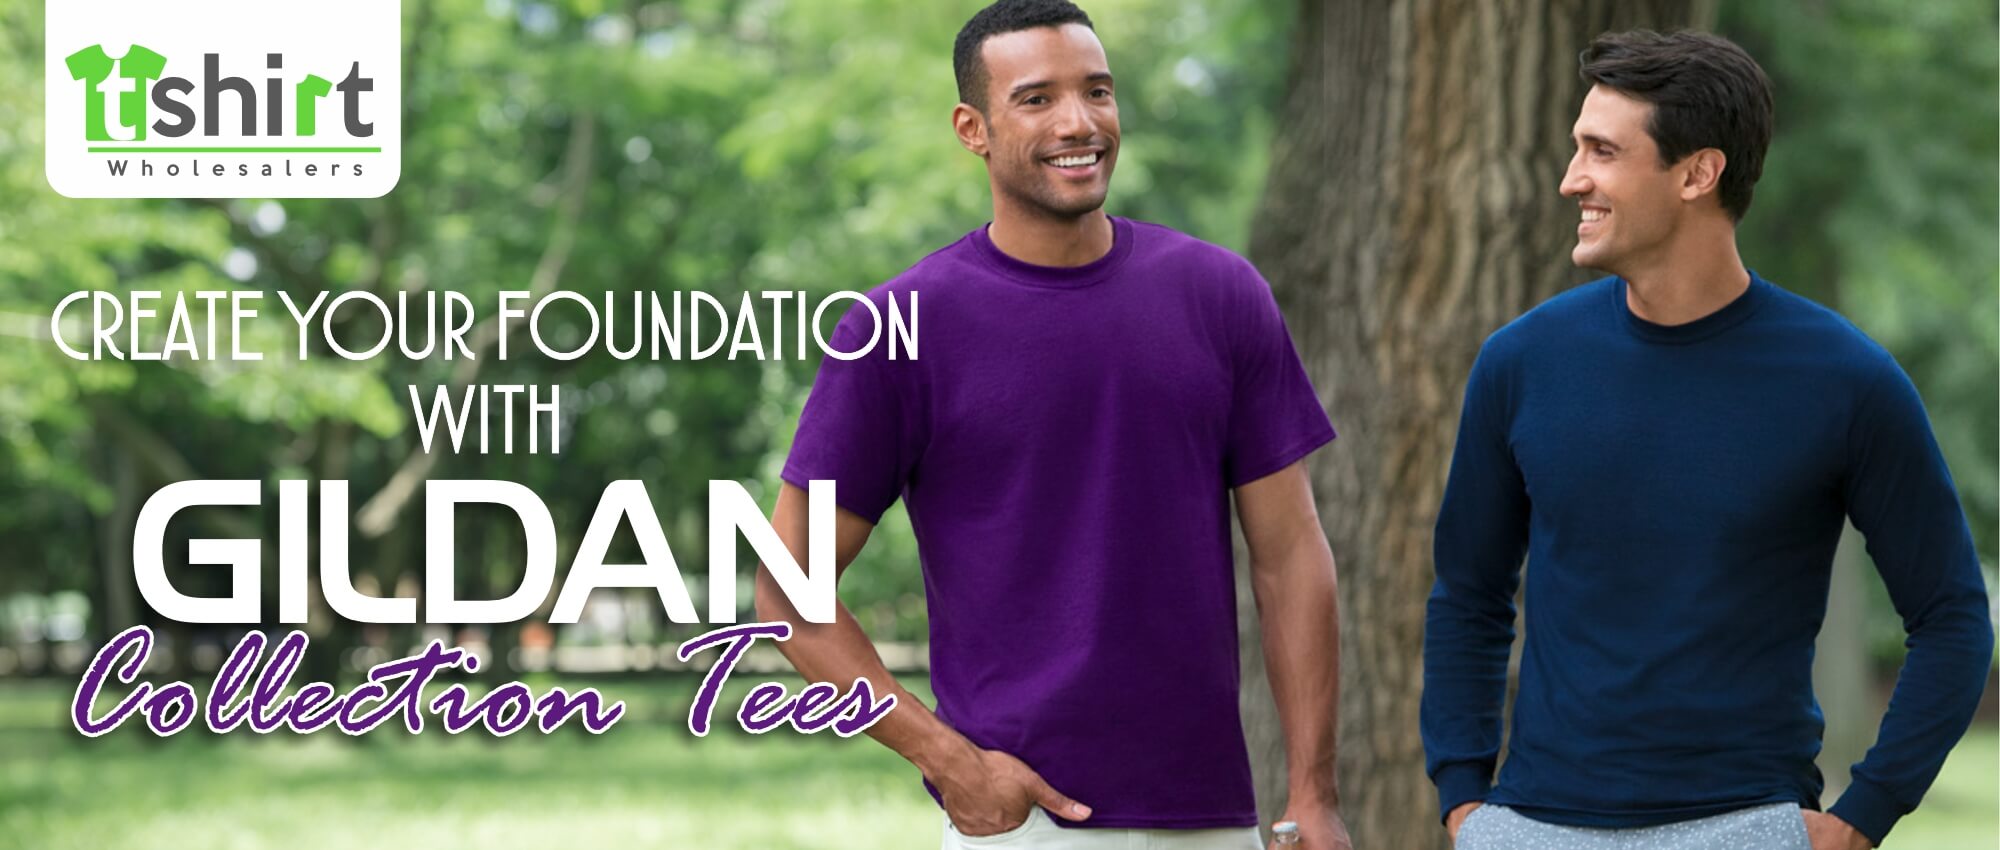 CREATE YOUR FOUNDATION WITH  GILDAN COLLECTION TEES